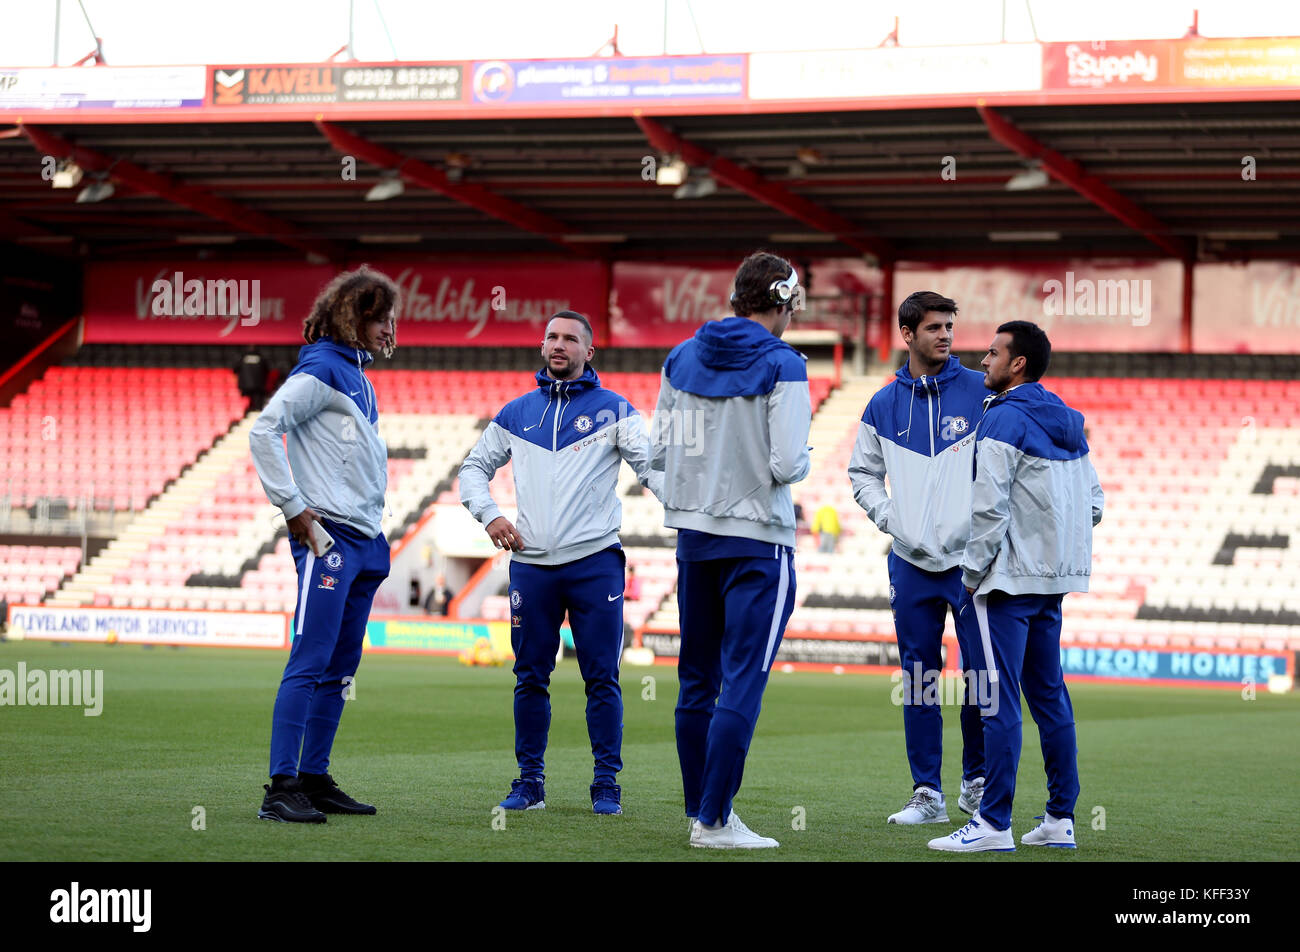 Chelsea's players including Ethan Ampadu, Danny Drinkwater, Alvaro Morata and Pedro check out the pitch before the Premier League match at the Vitality Stadium, Bournemouth. Stock Photo